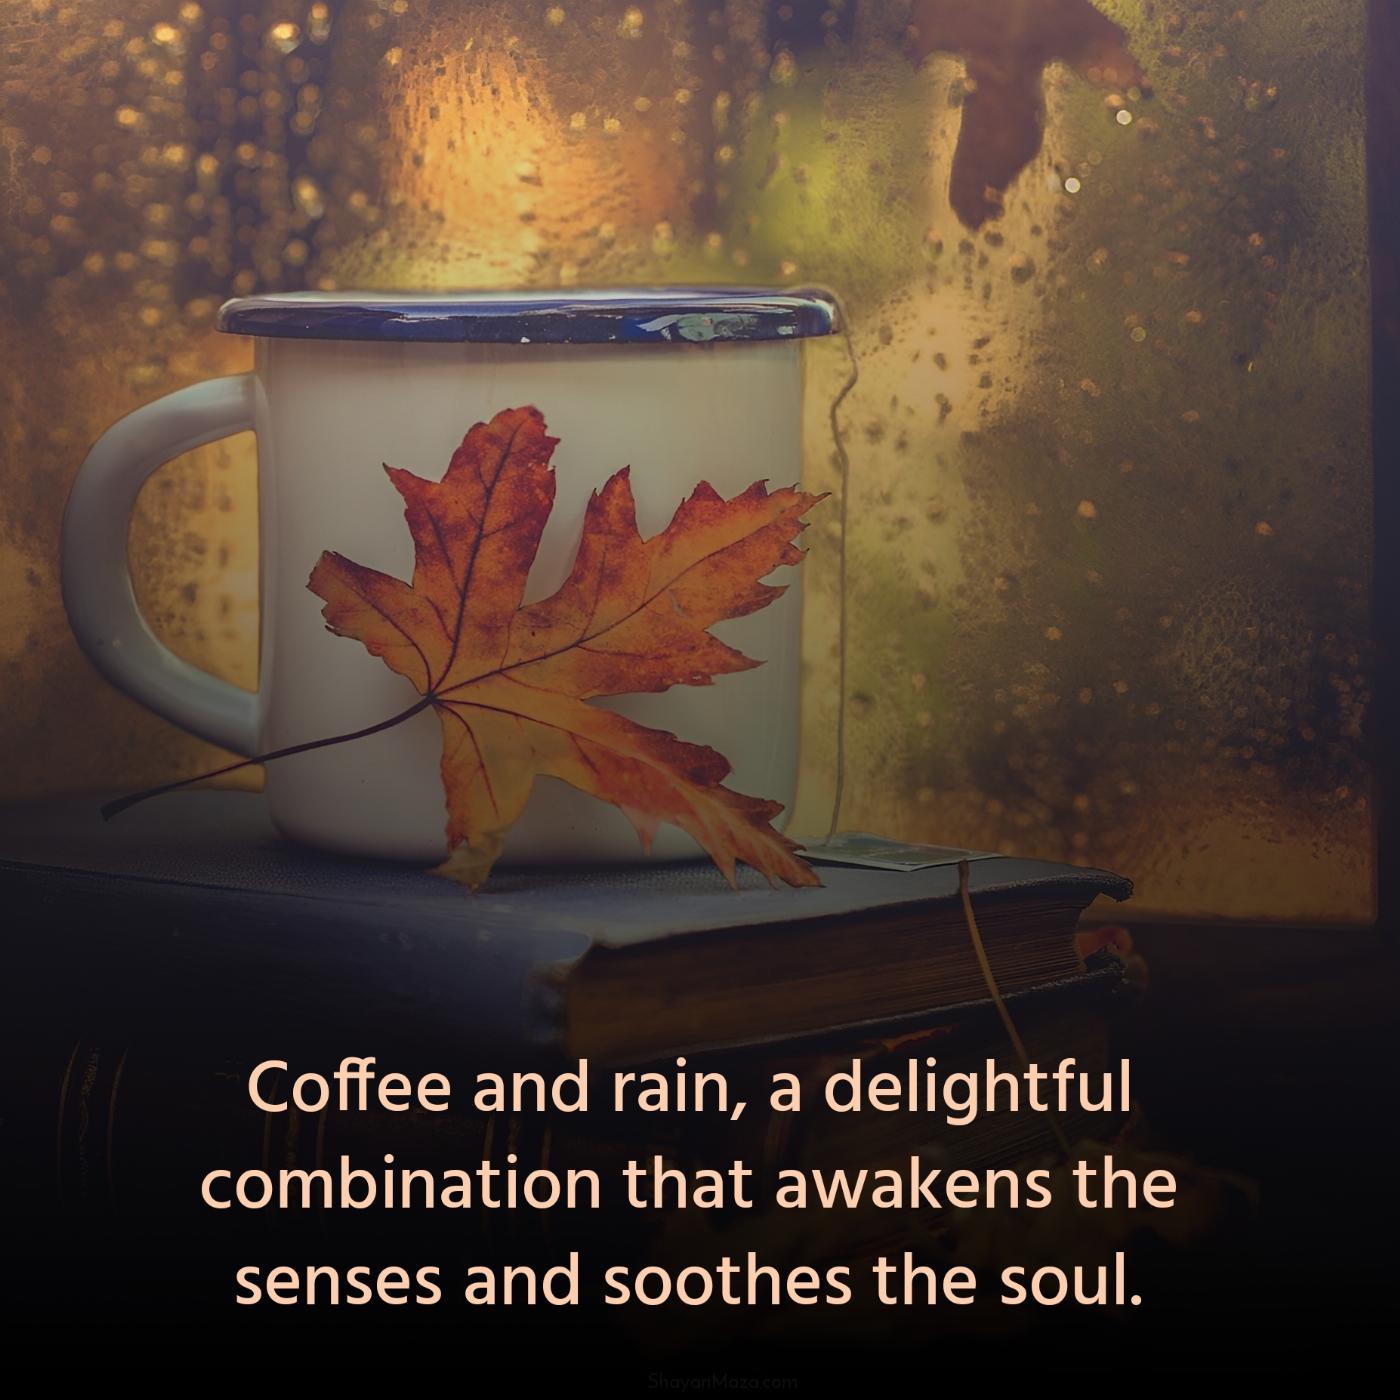 Coffee and rain a delightful combination that awakens the senses